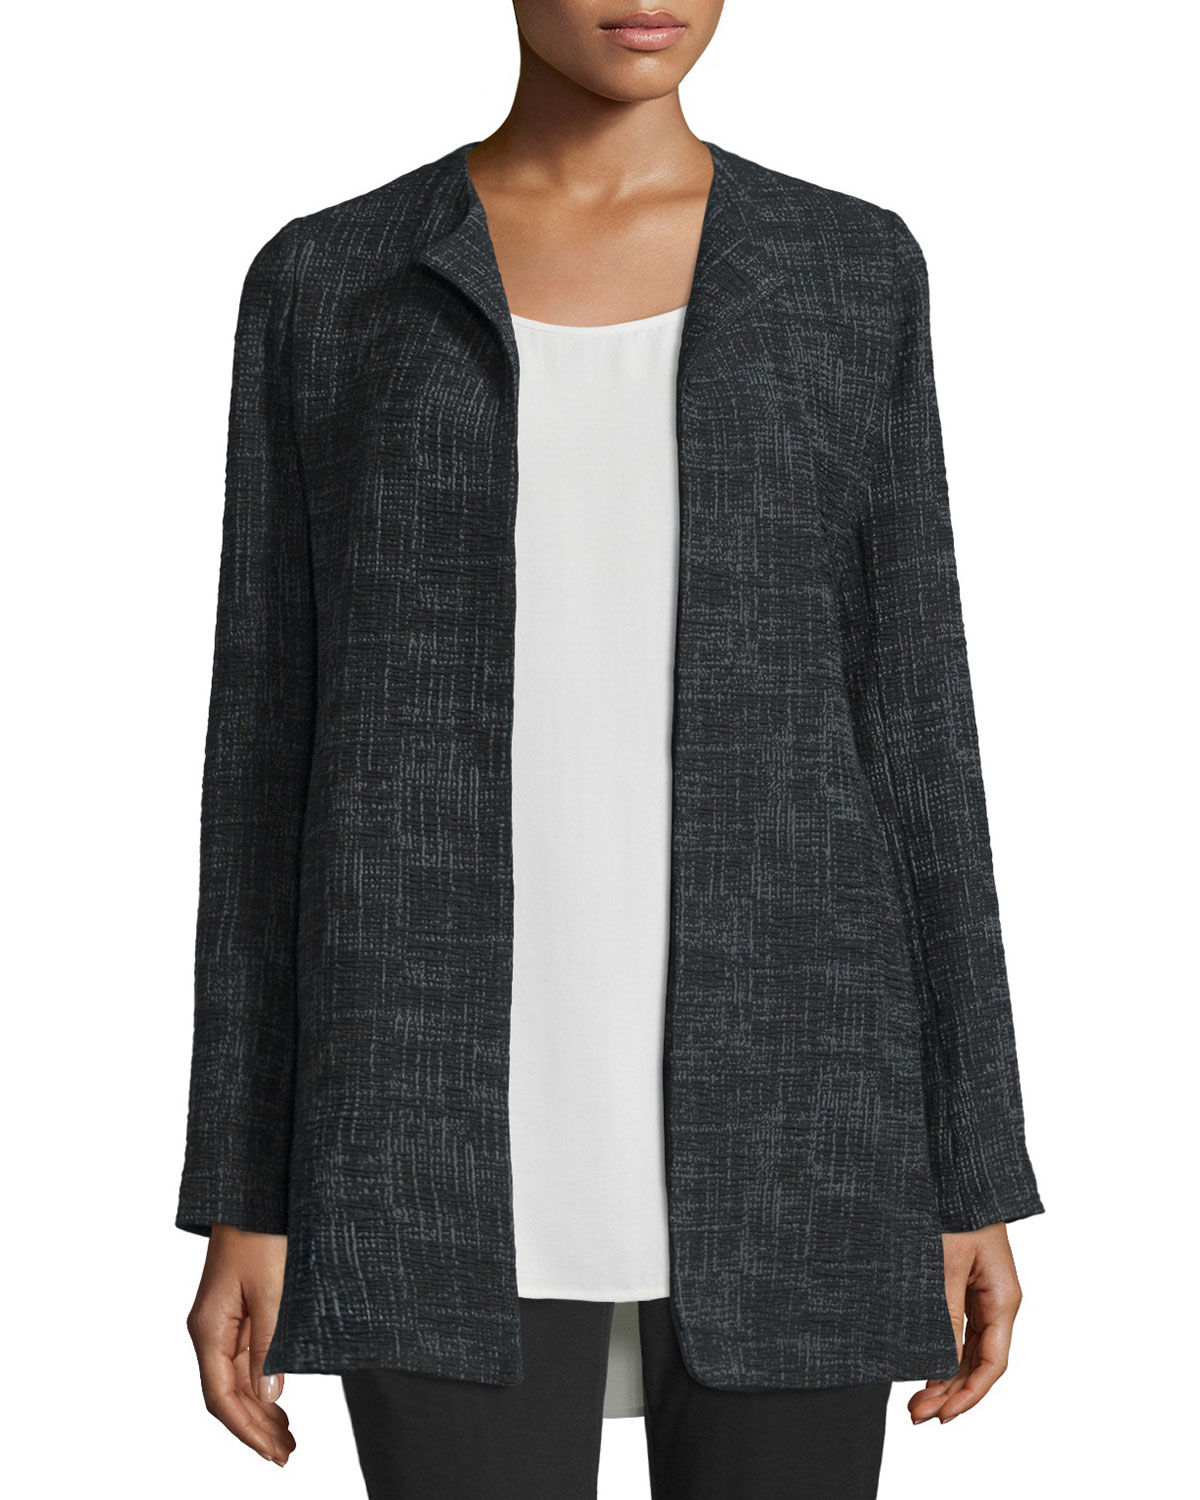 Eileen fisher Crosshatched Long Jacket in Black | Lyst